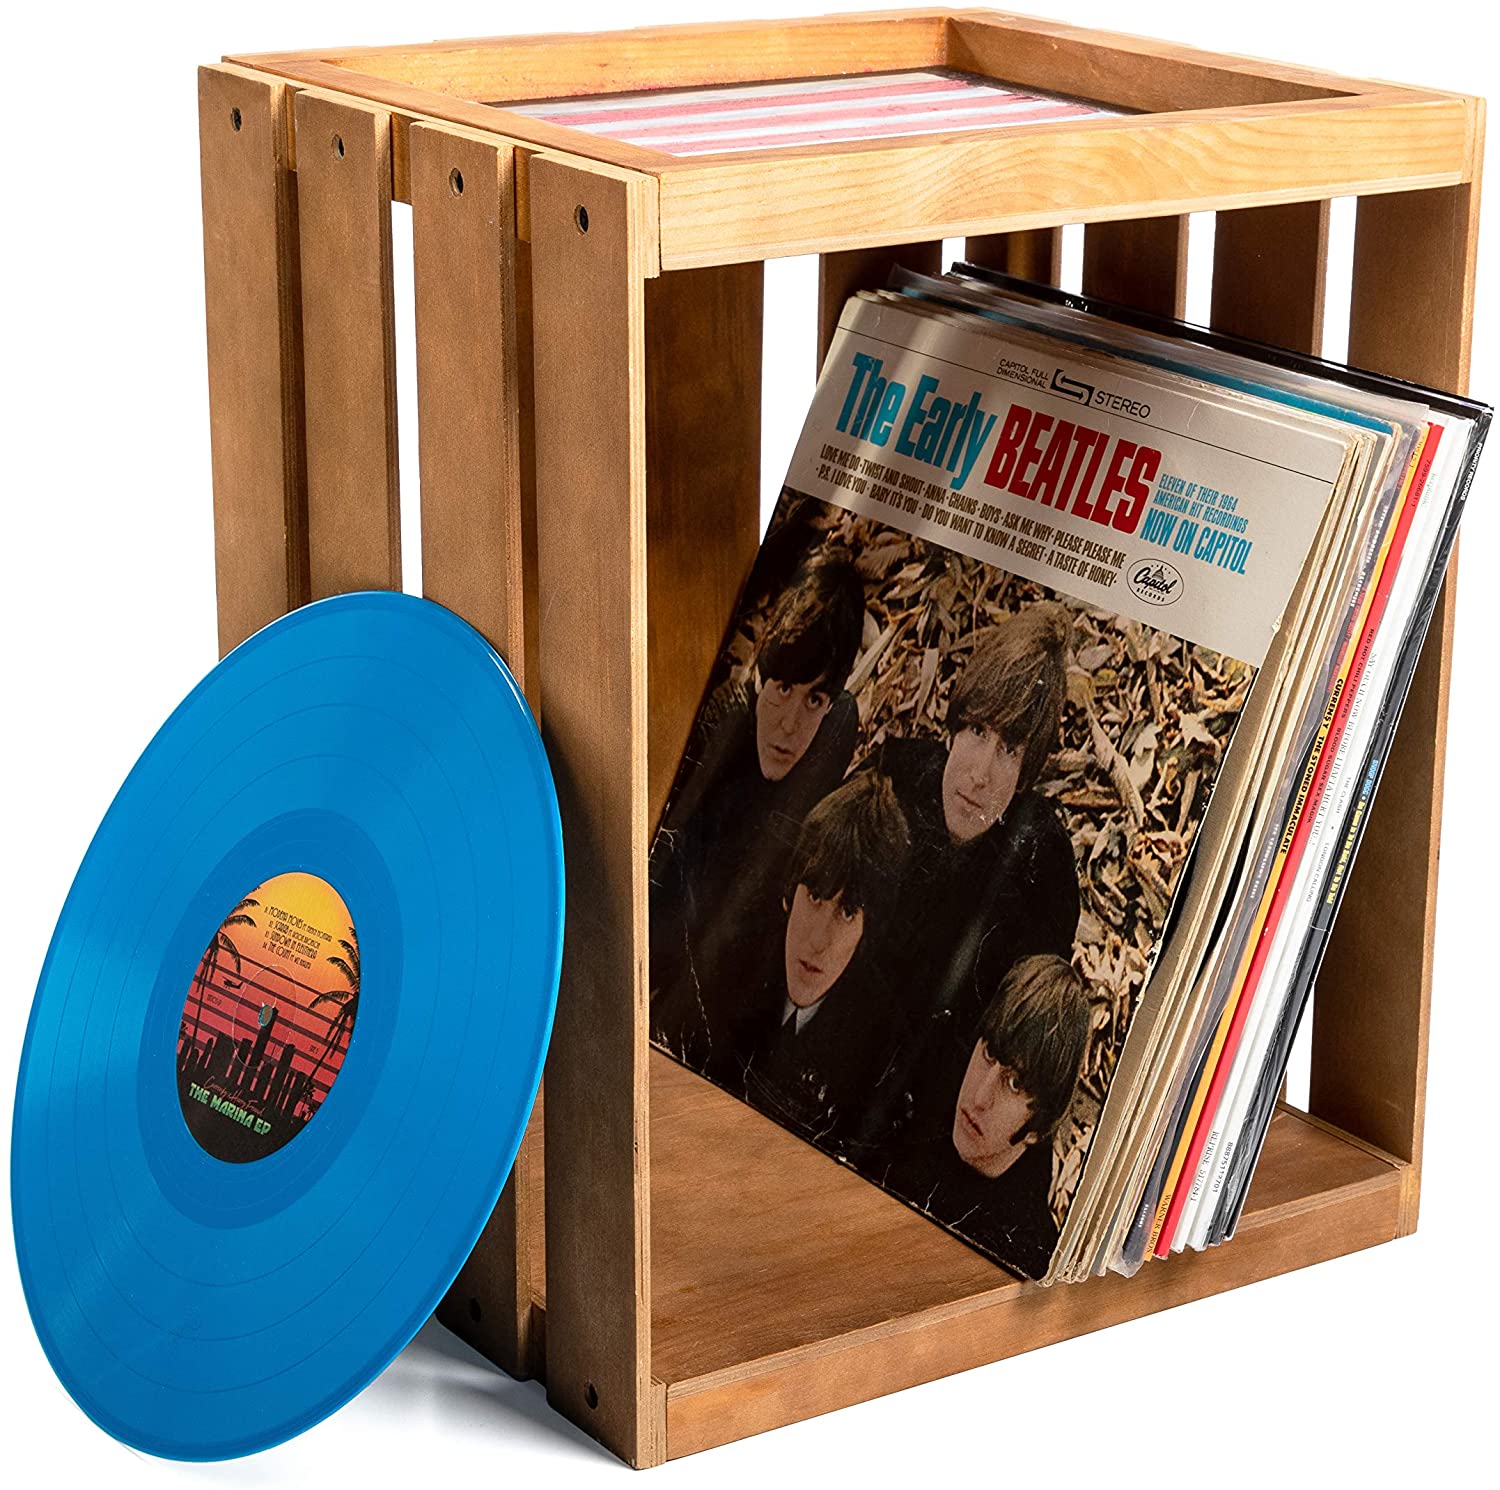 Vinyl Record Storage Create In Classic Wood Color